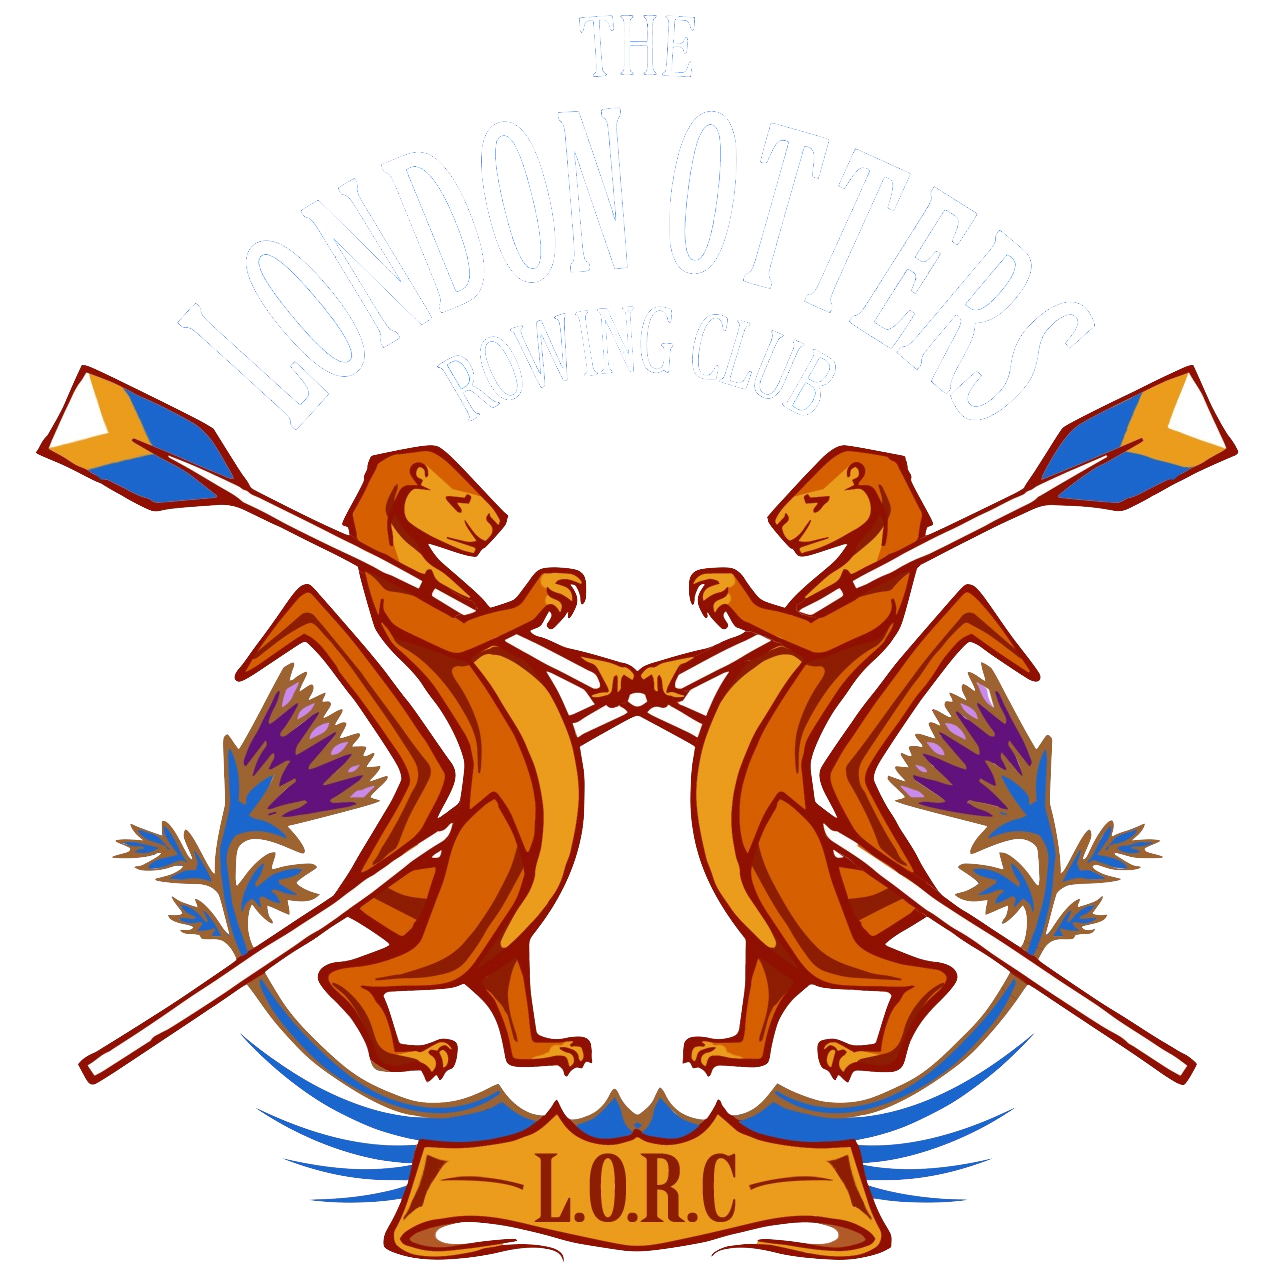 London Otters Rowing Club